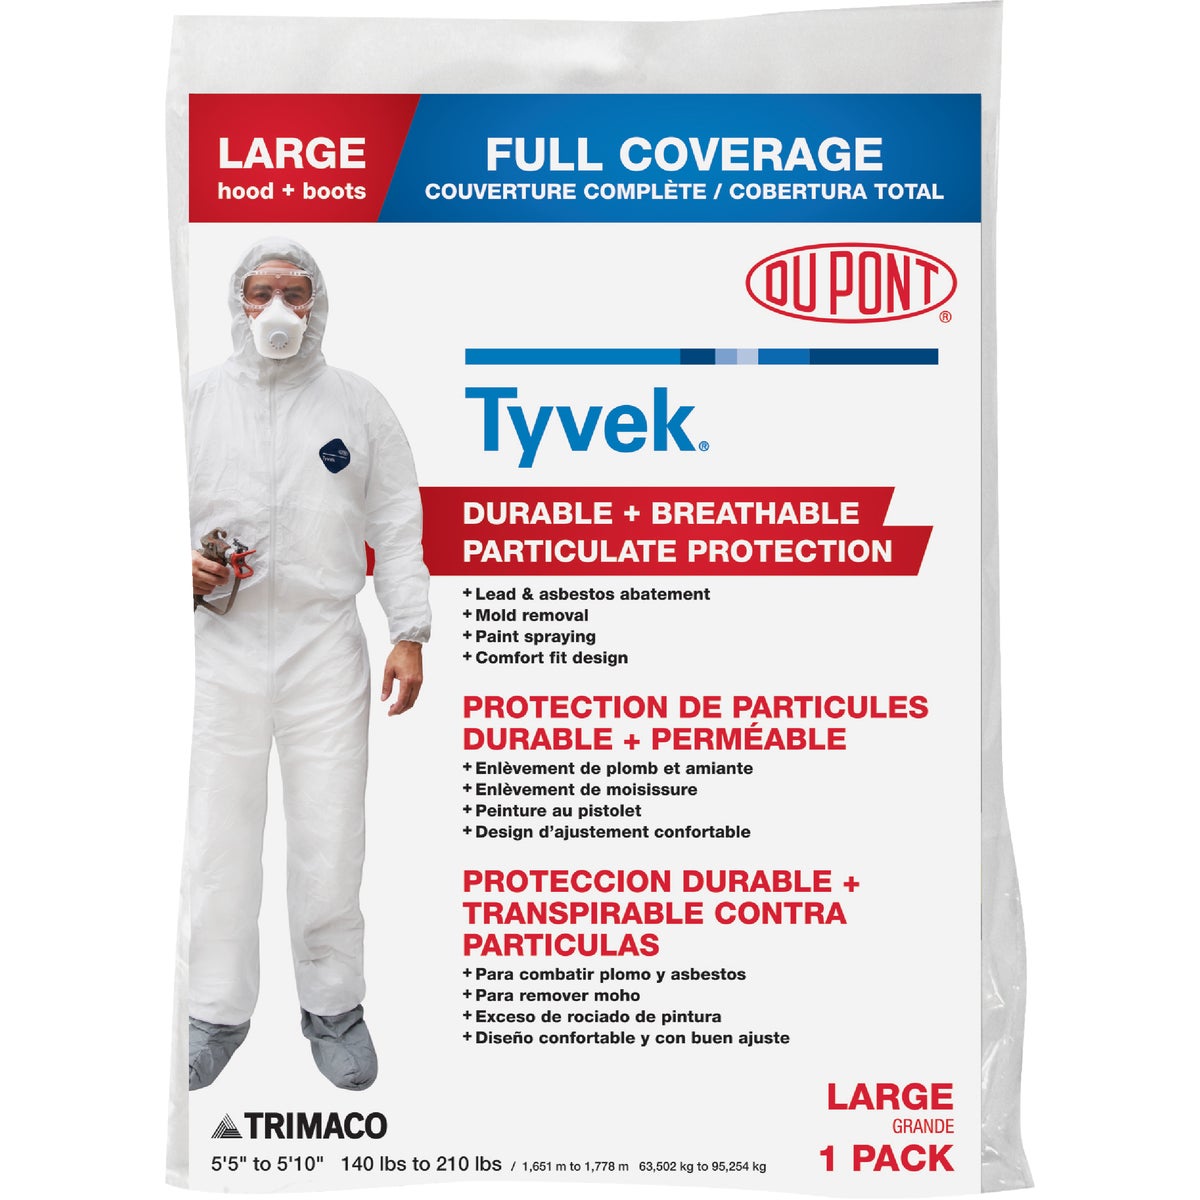 Item 772383, Trimaco's Coveralls with Hood and Boot made with Dupont's exclusive Tyvek 